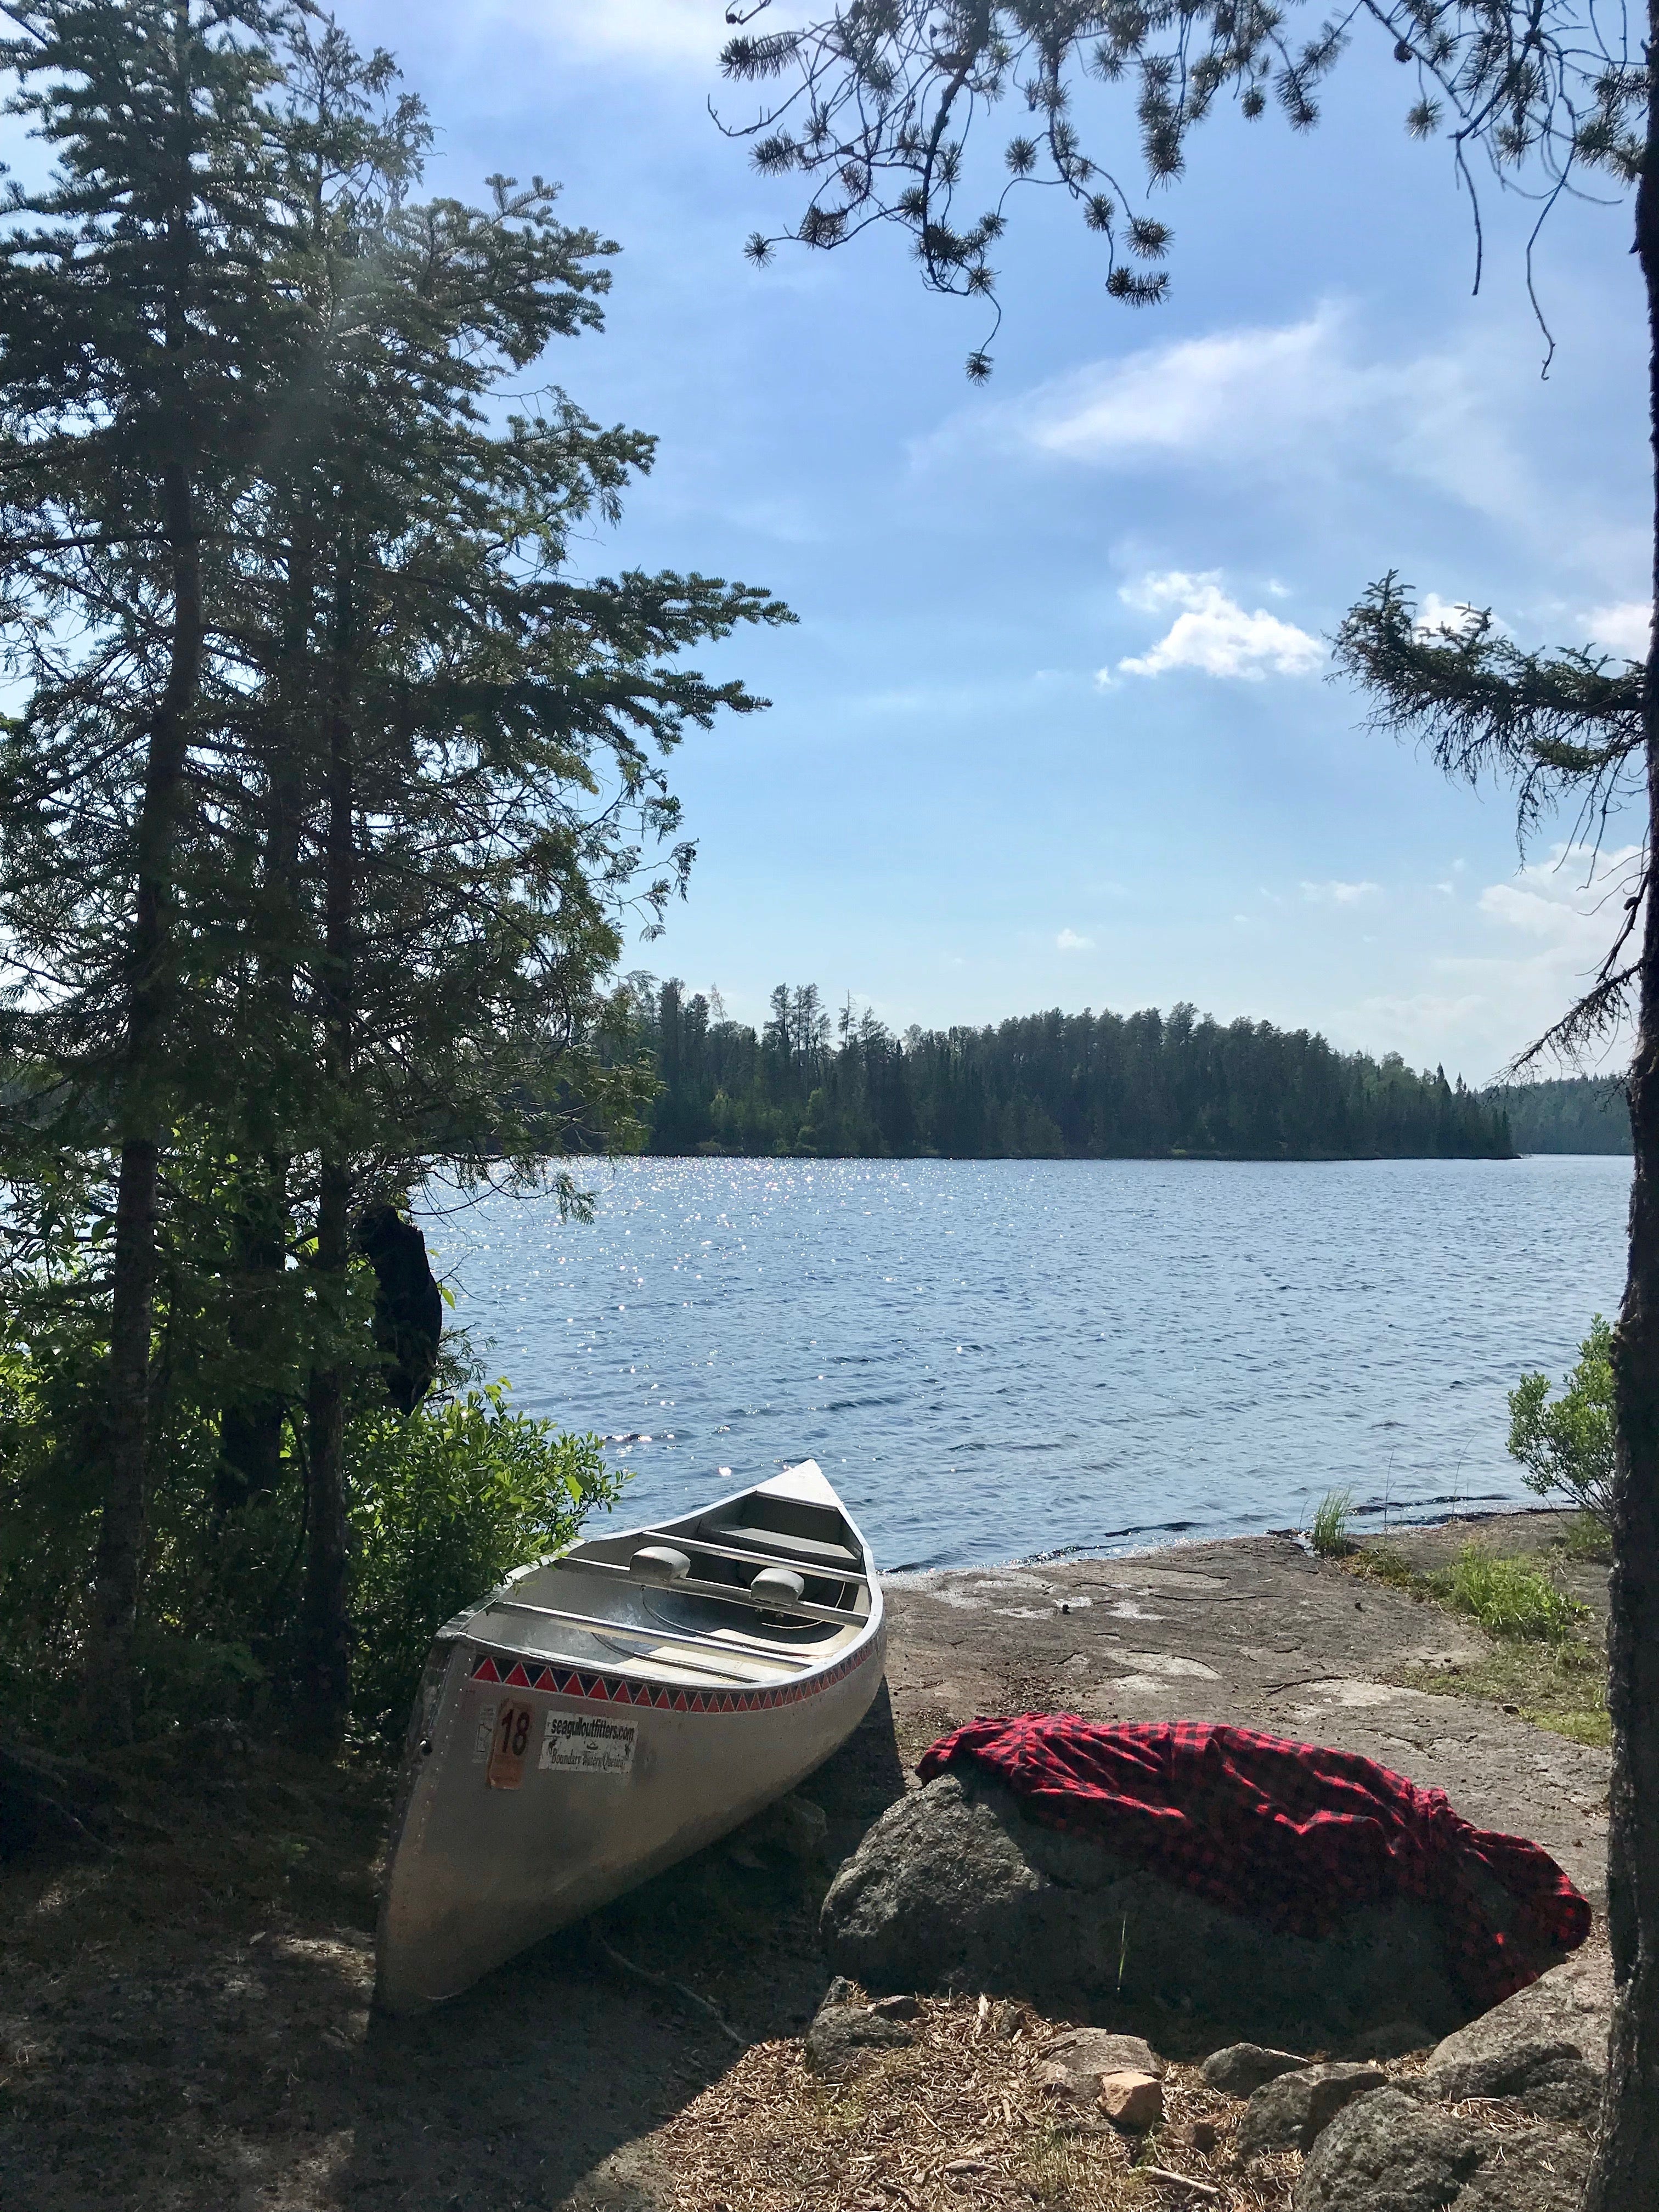 Camper submitted image from Boundary Waters Canoe Area, North Temperance Lake Backcountry Camping Site #905 - 5